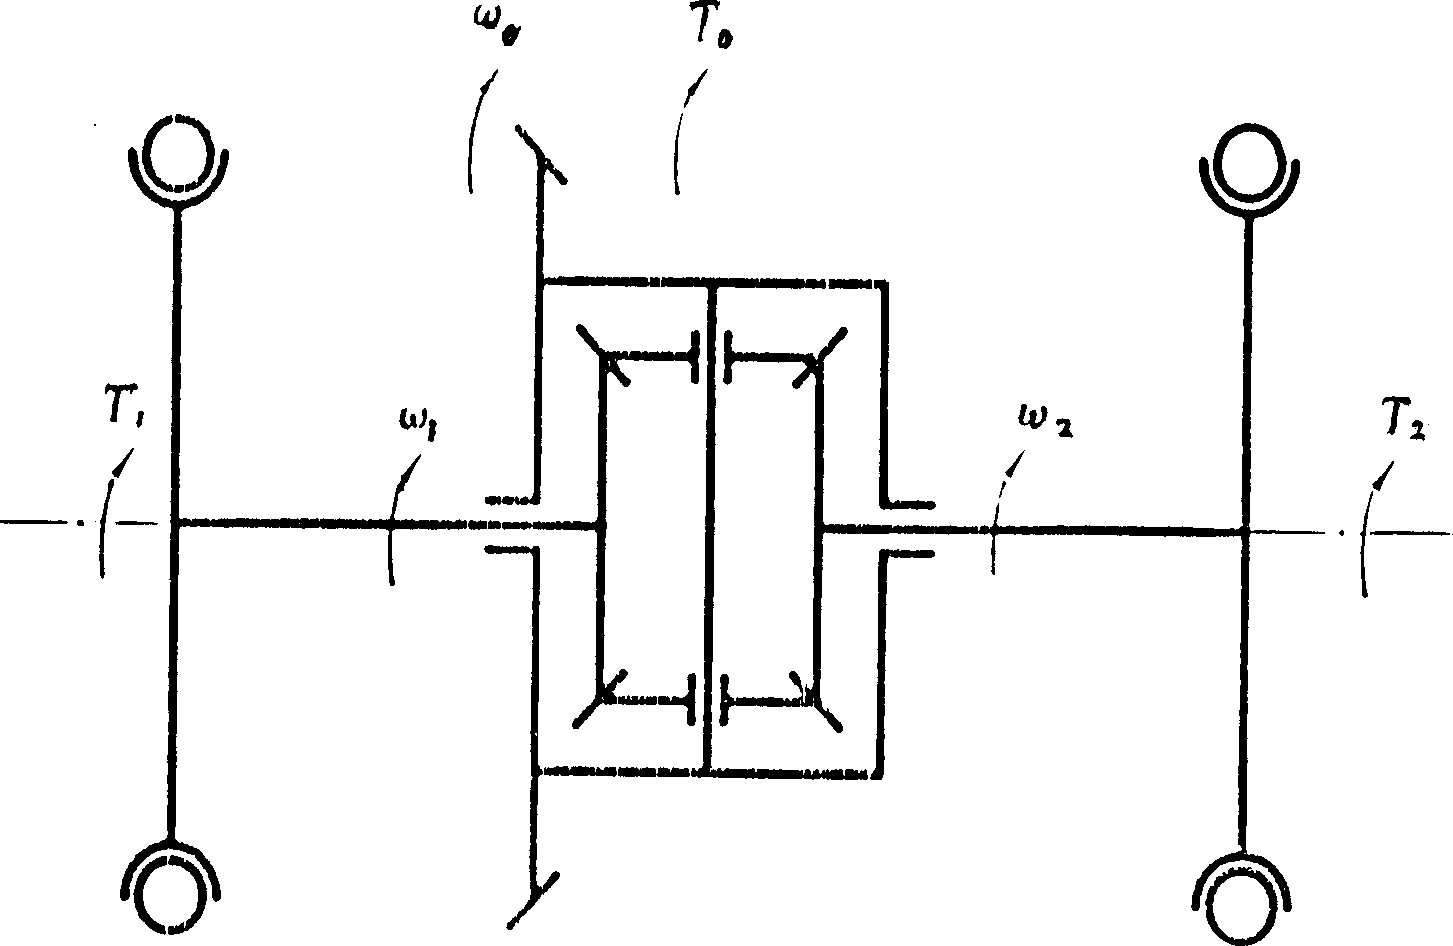 Anti-skid differential with adaptive speed ratio